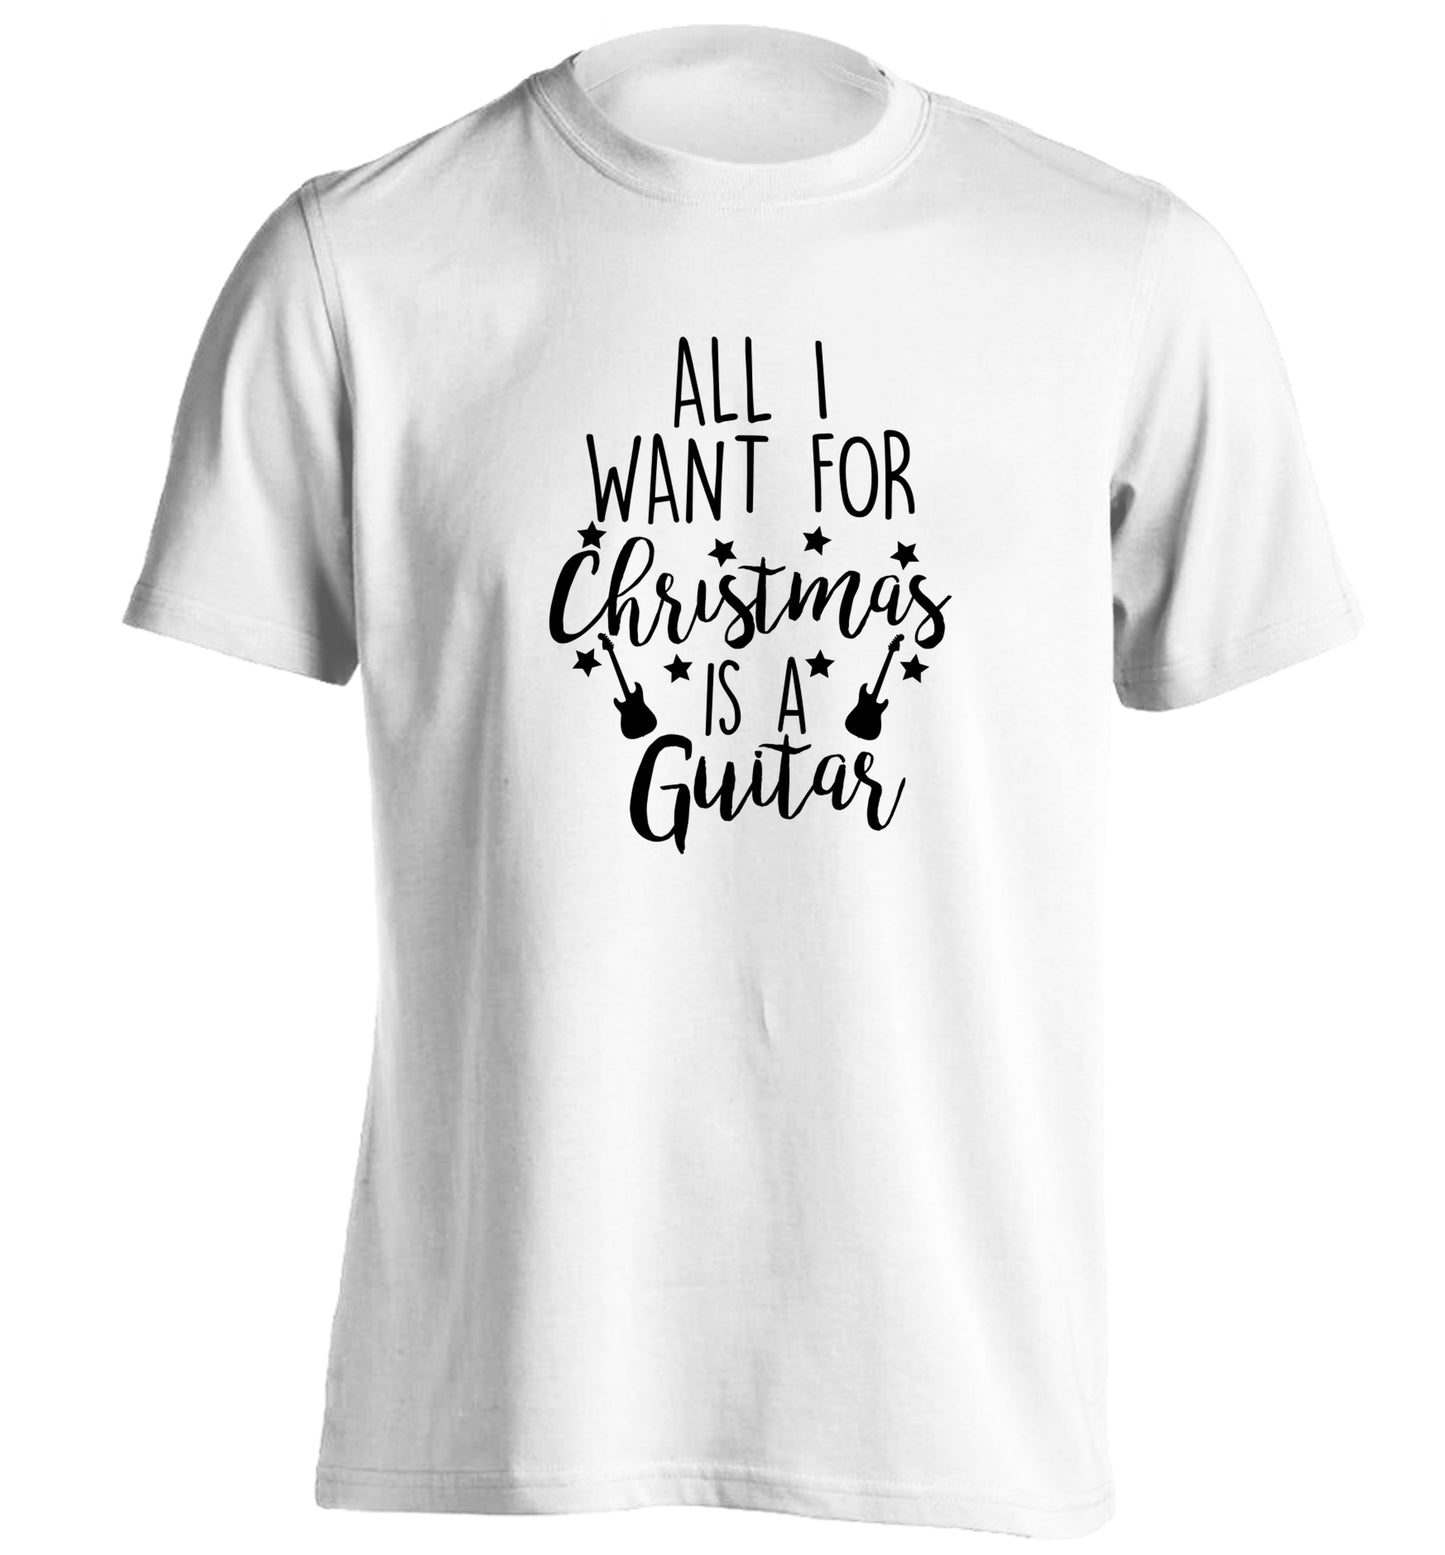 All I want for Christmas is a guitar adults unisex white Tshirt 2XL